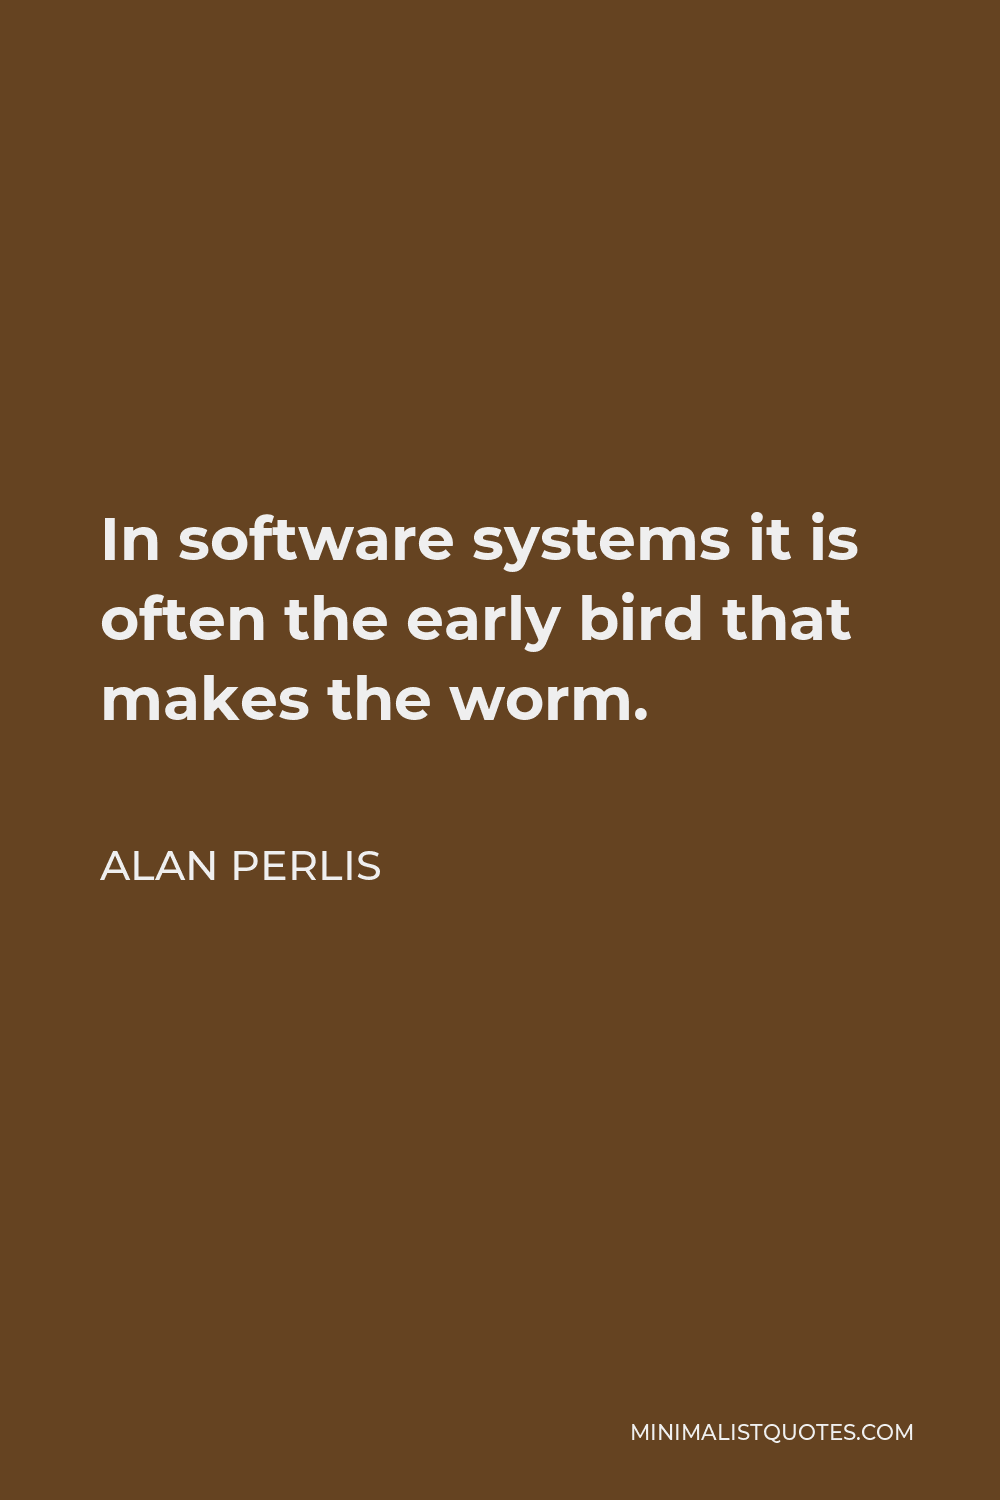 Alan Perlis Quote - In software systems it is often the early bird that makes the worm.